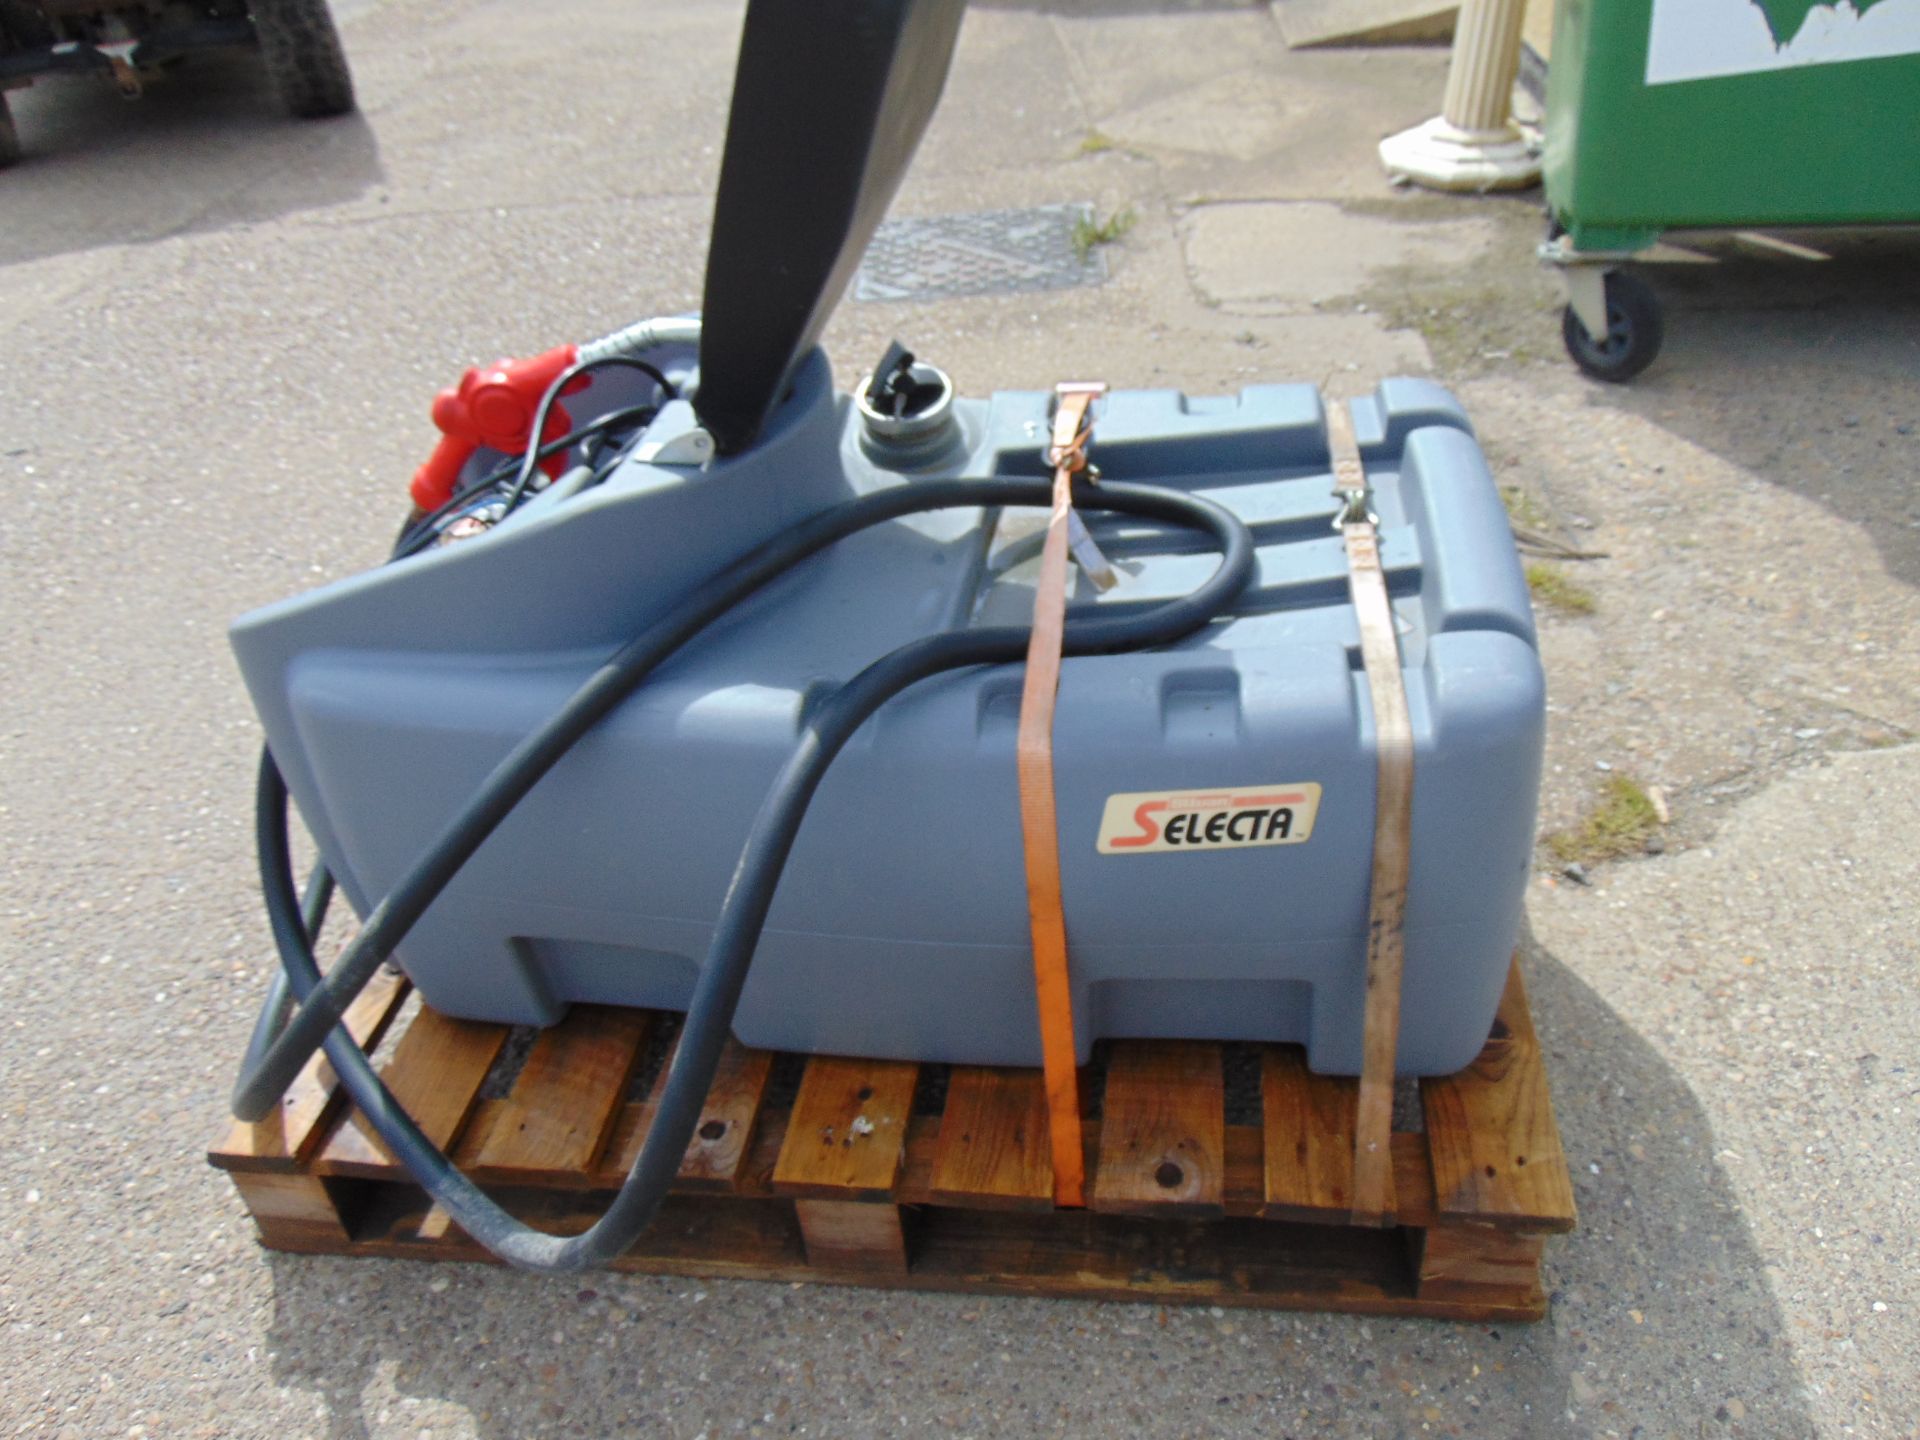 Selecta 200 Litre 50 Gall Portable Refuel Tank c/w 12Volt Pump Hose and Automatic Refuelling Nozzle - Image 4 of 14